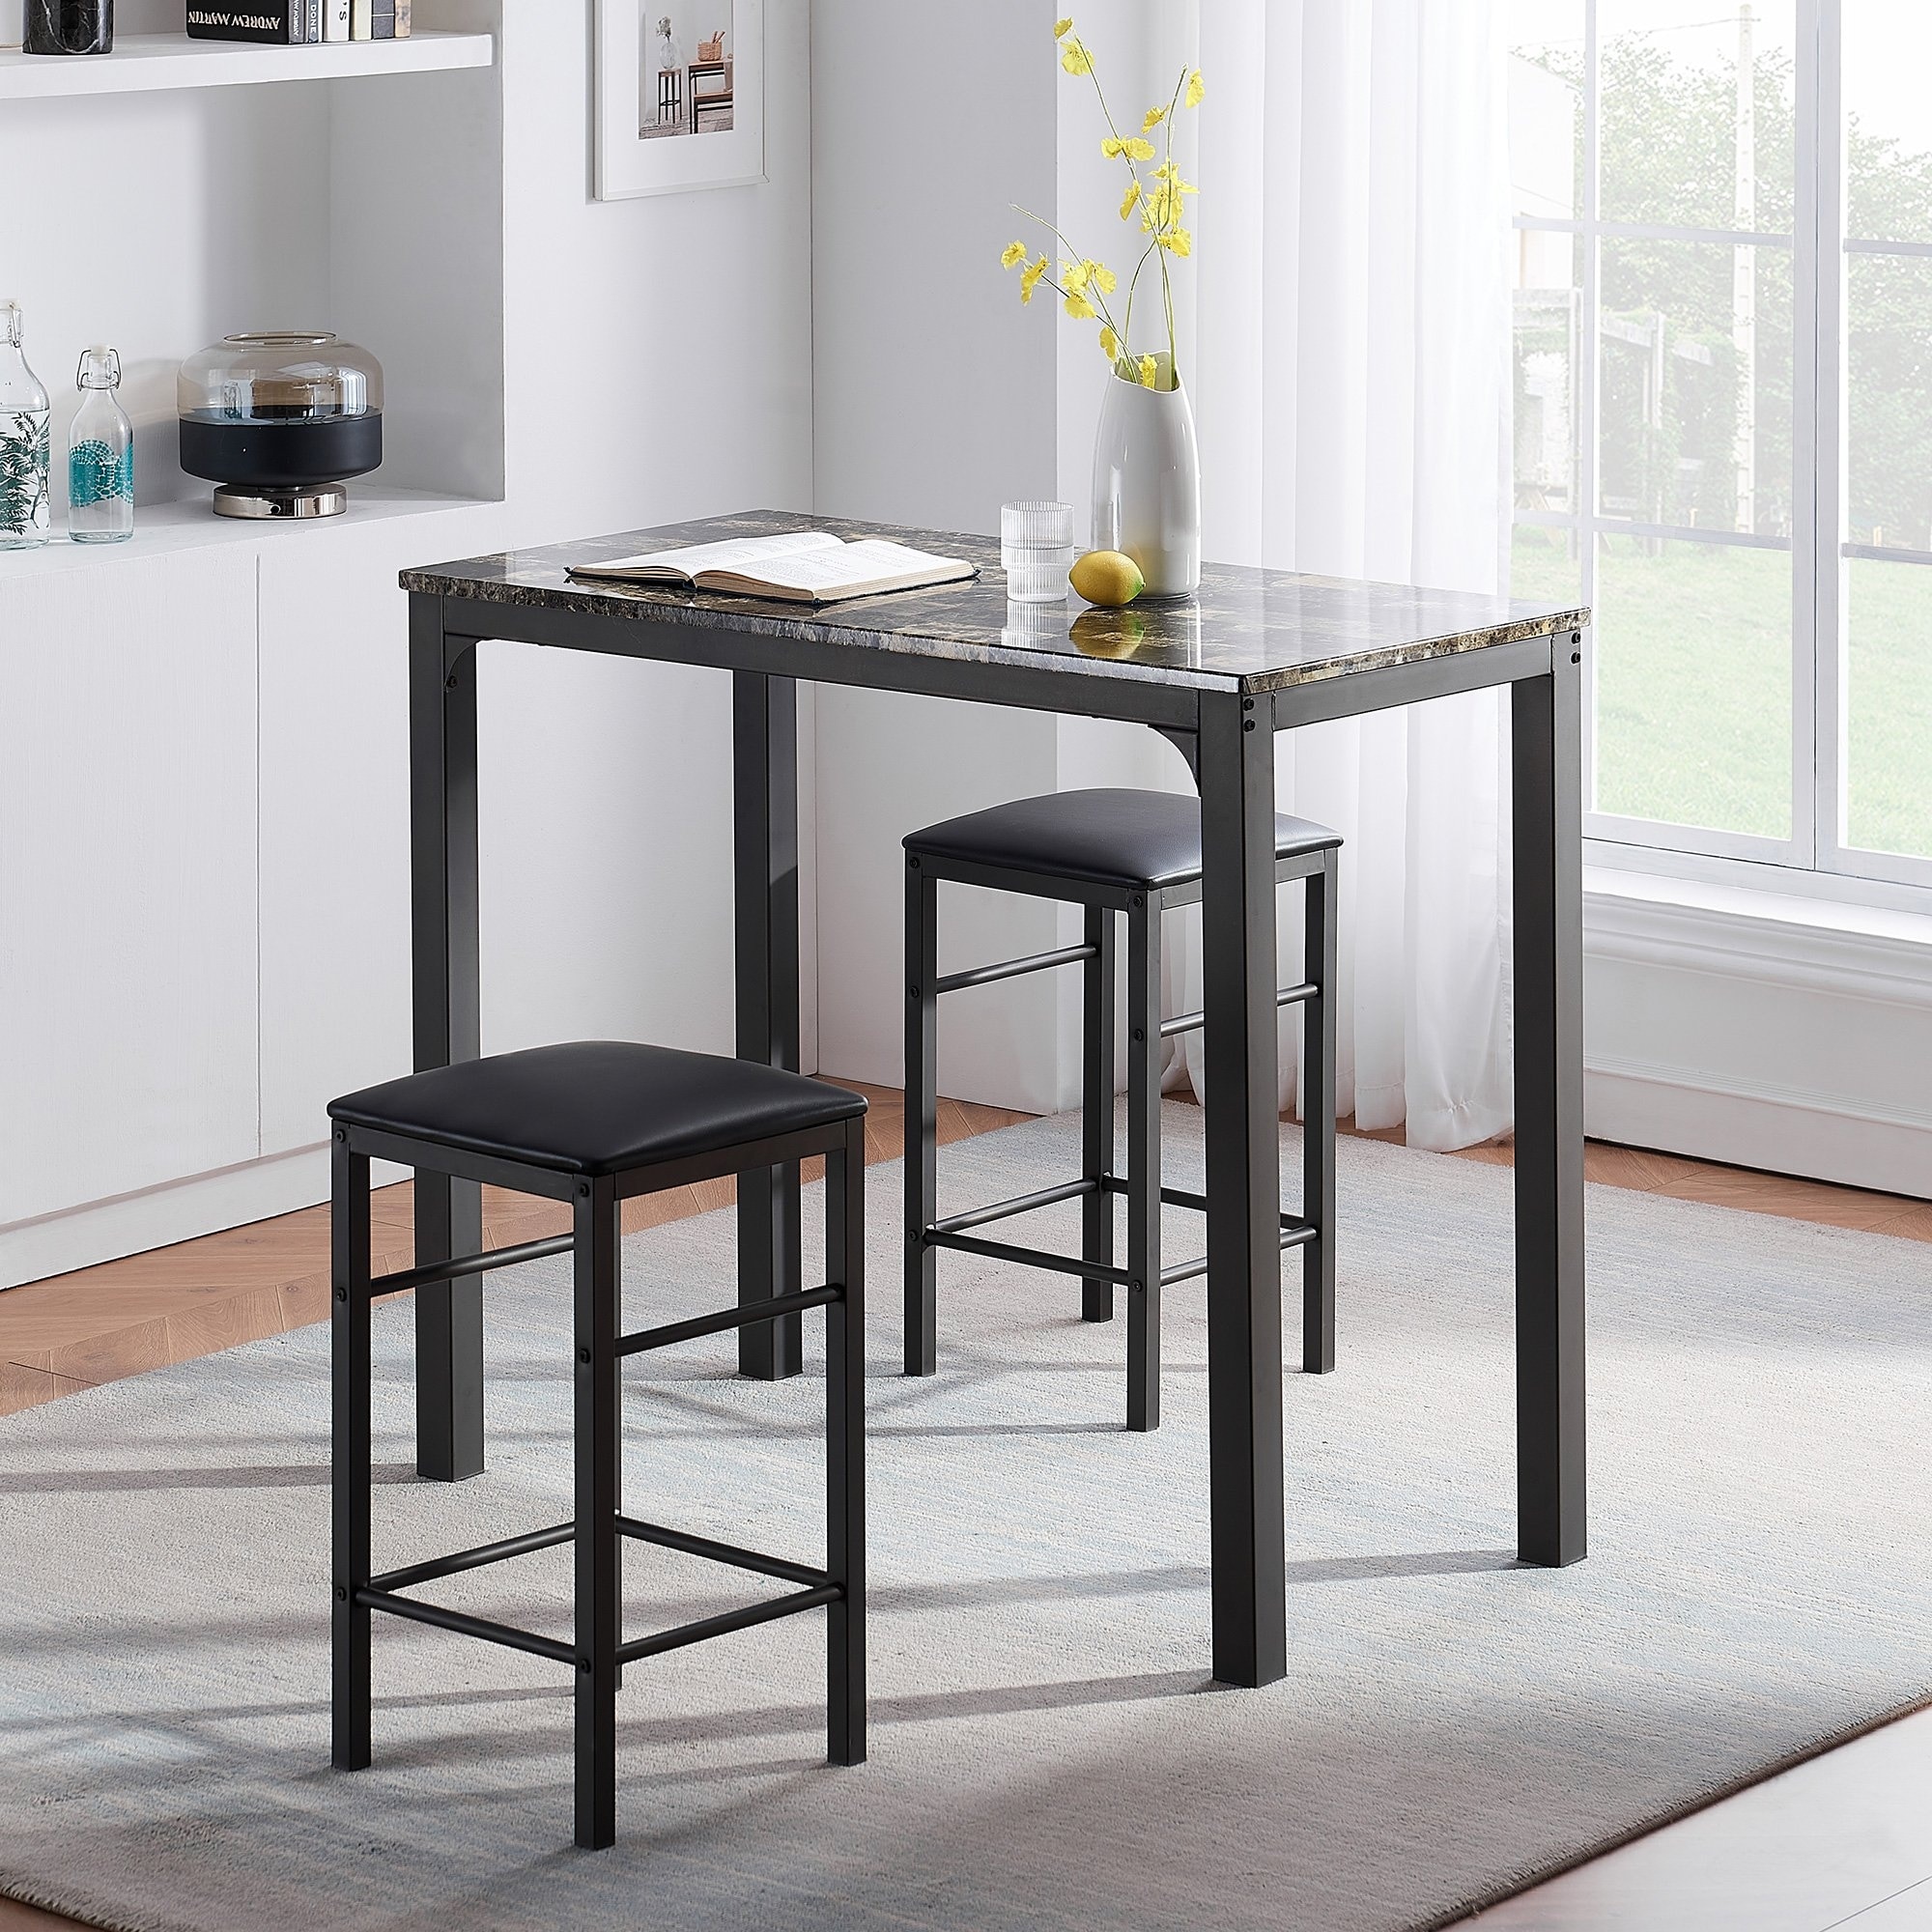 Details about  / VECELO Home Kitchen Bar Table Sets//Counter Dining Table Sets 3PCS 2 Options